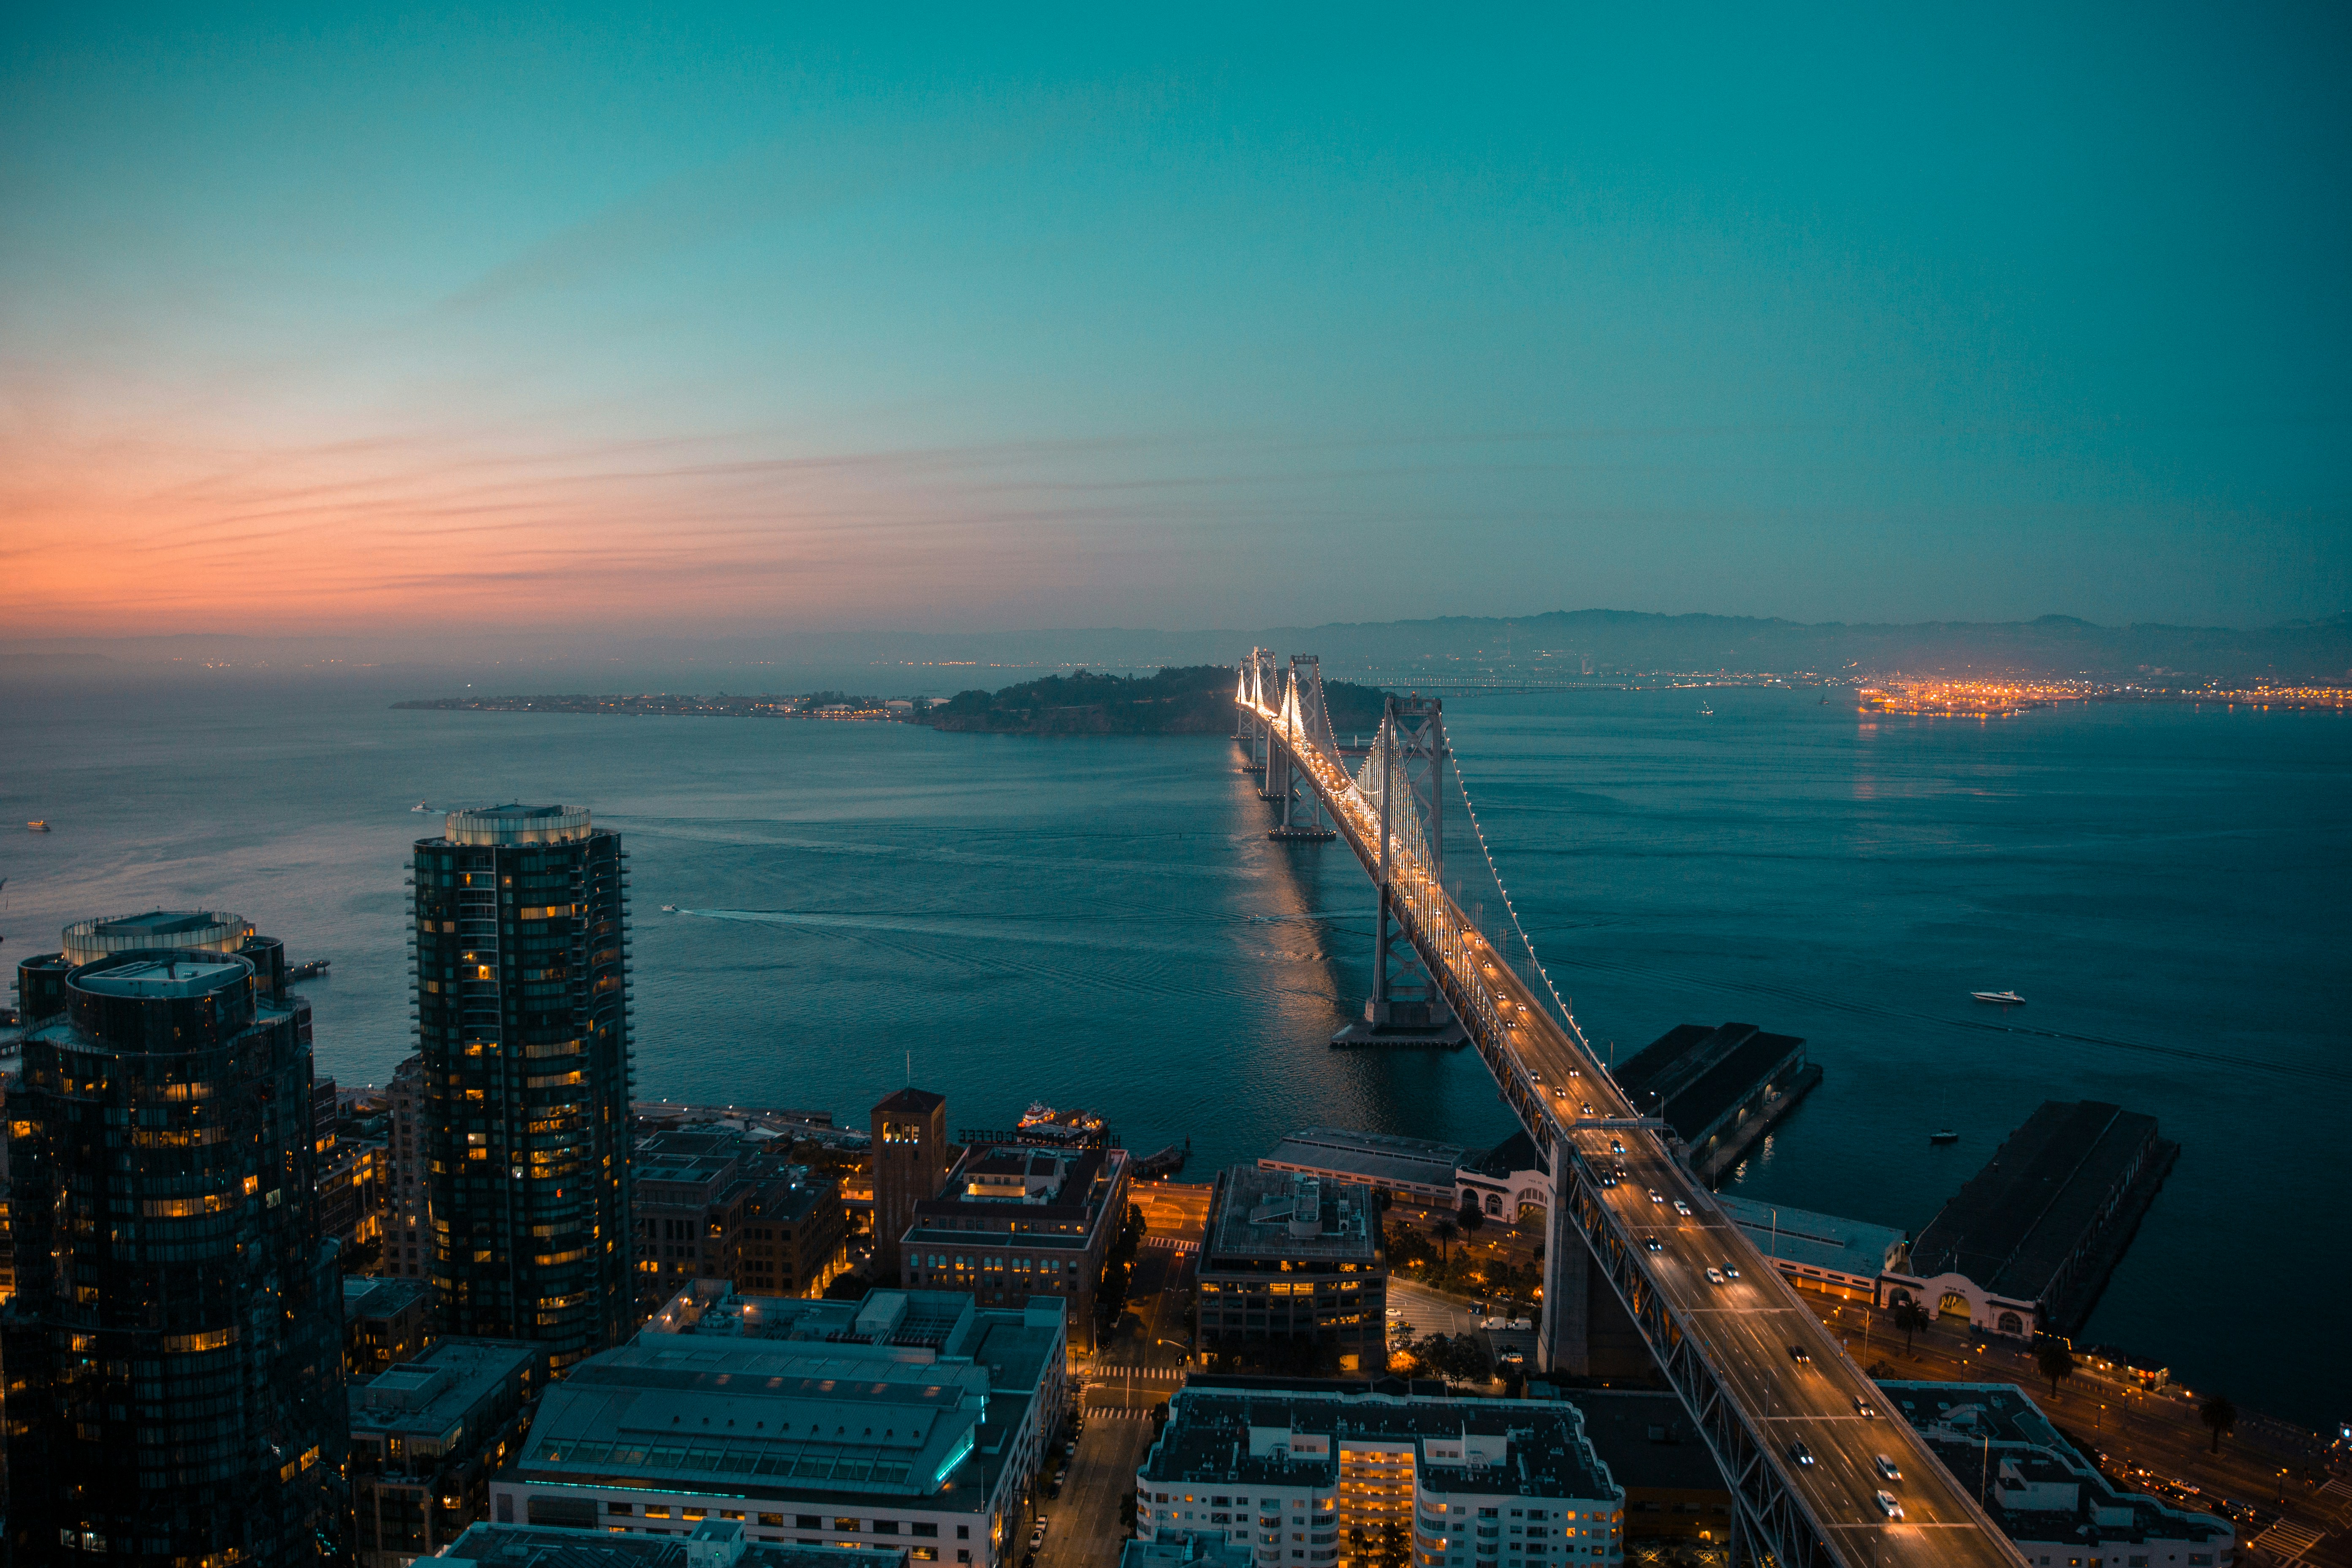 I made my way to the top of one of San Francisco’s tallest buildings just as the sun was setting to catch this moment.